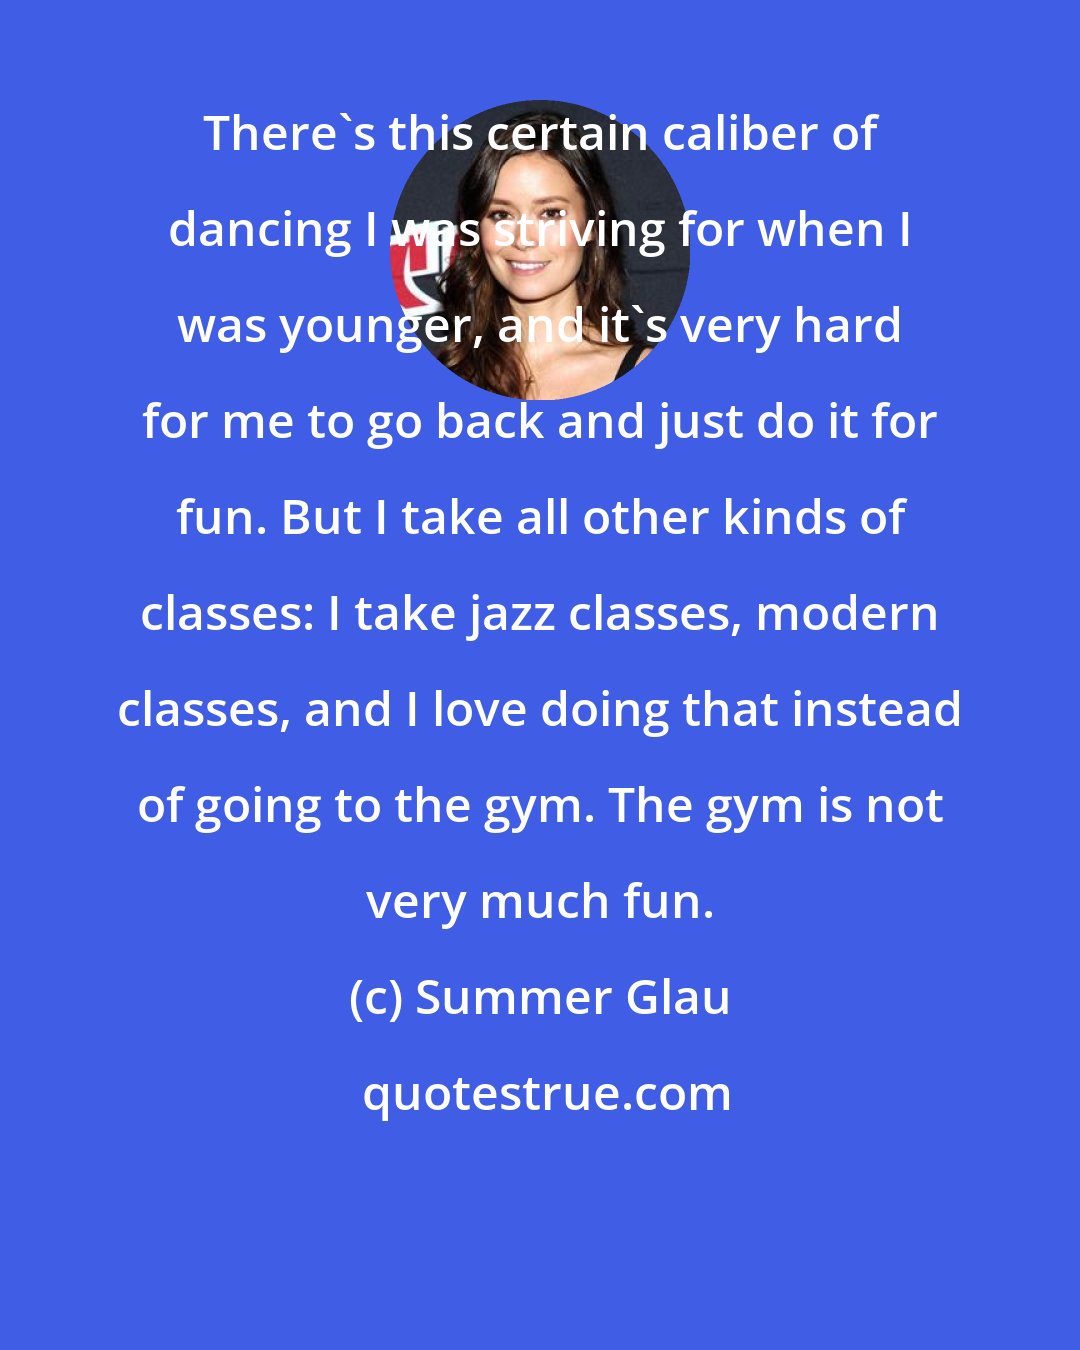 Summer Glau: There's this certain caliber of dancing I was striving for when I was younger, and it's very hard for me to go back and just do it for fun. But I take all other kinds of classes: I take jazz classes, modern classes, and I love doing that instead of going to the gym. The gym is not very much fun.